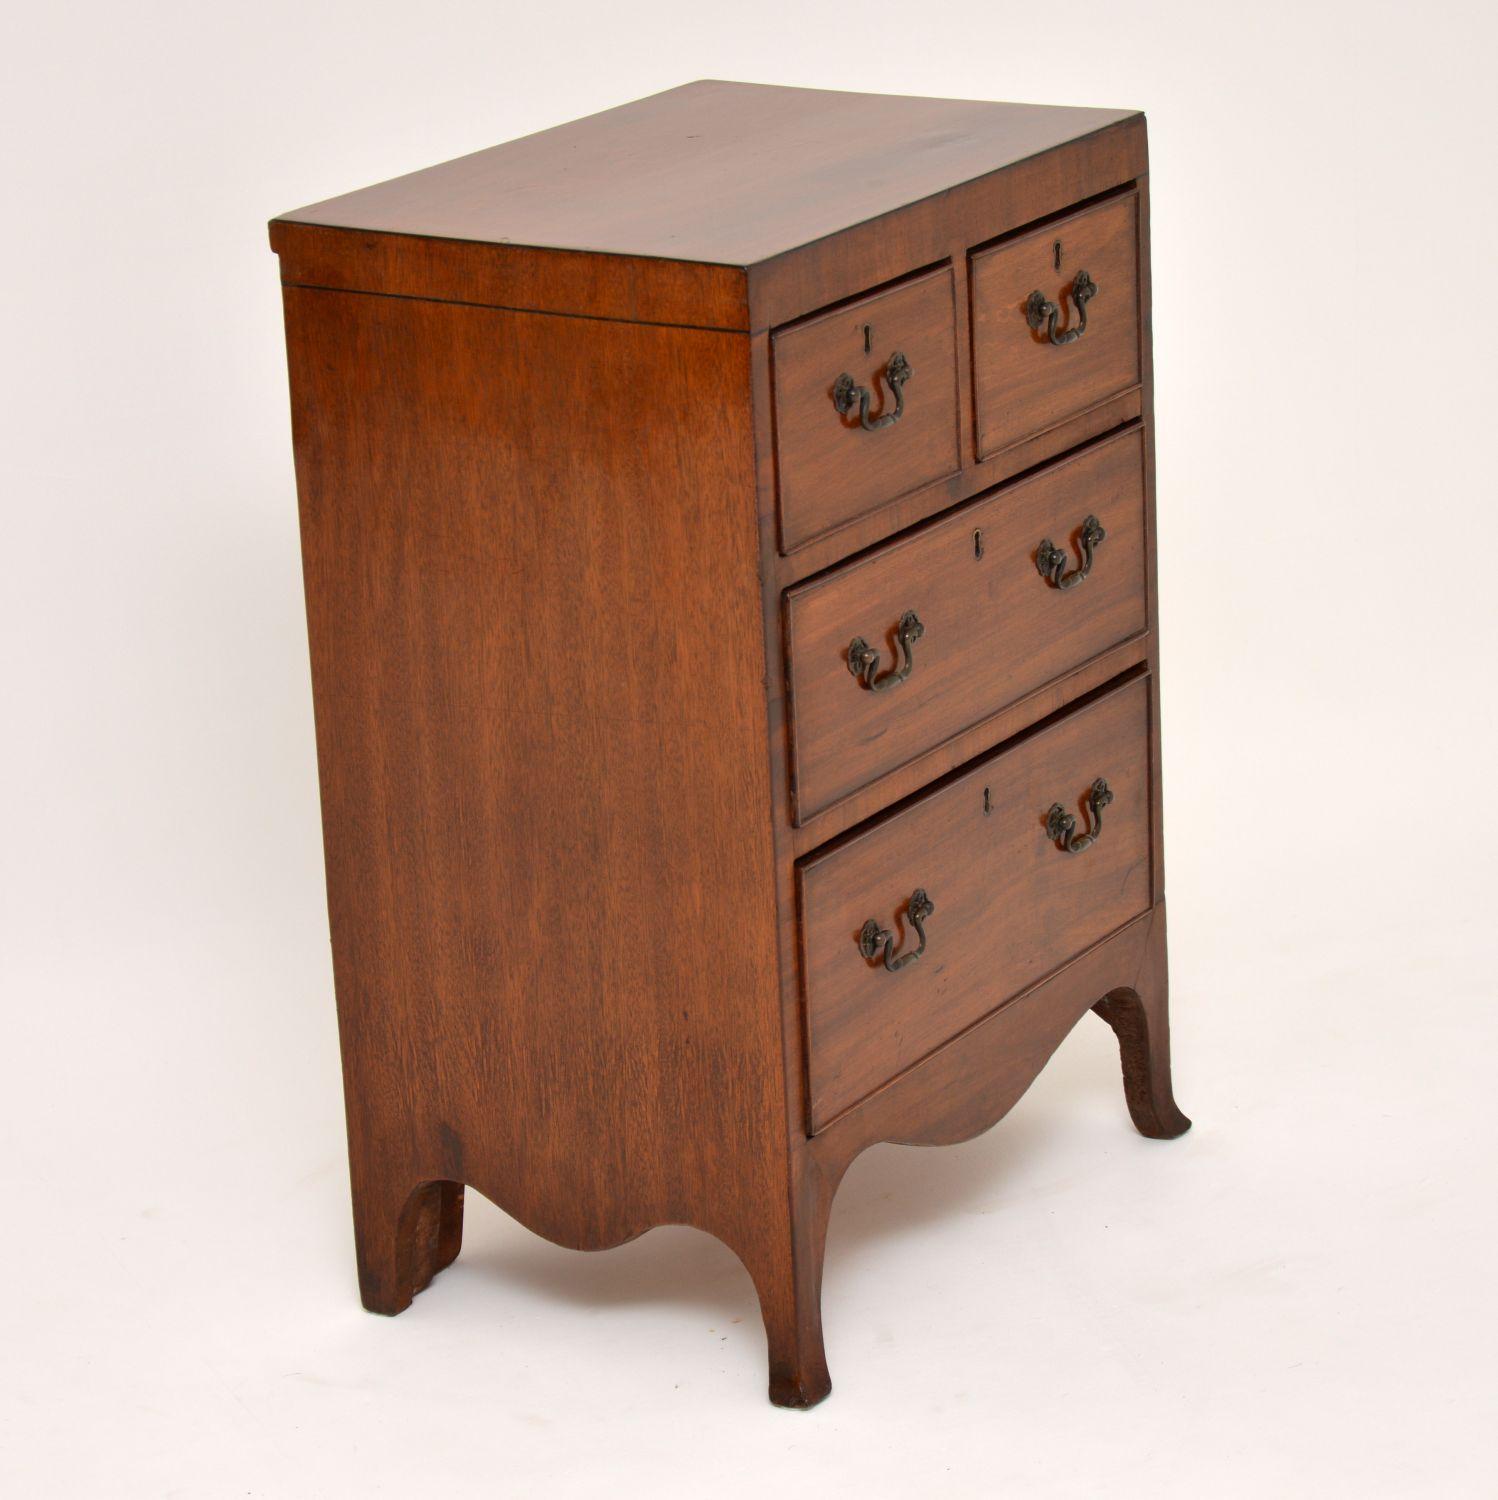 This antique George III mahogany chest of drawers has delightfully small proportions and is in excellent original condition. I would date it to around the 1810s-1820s and we believe the handles are original too. The drawers are graduated in depth